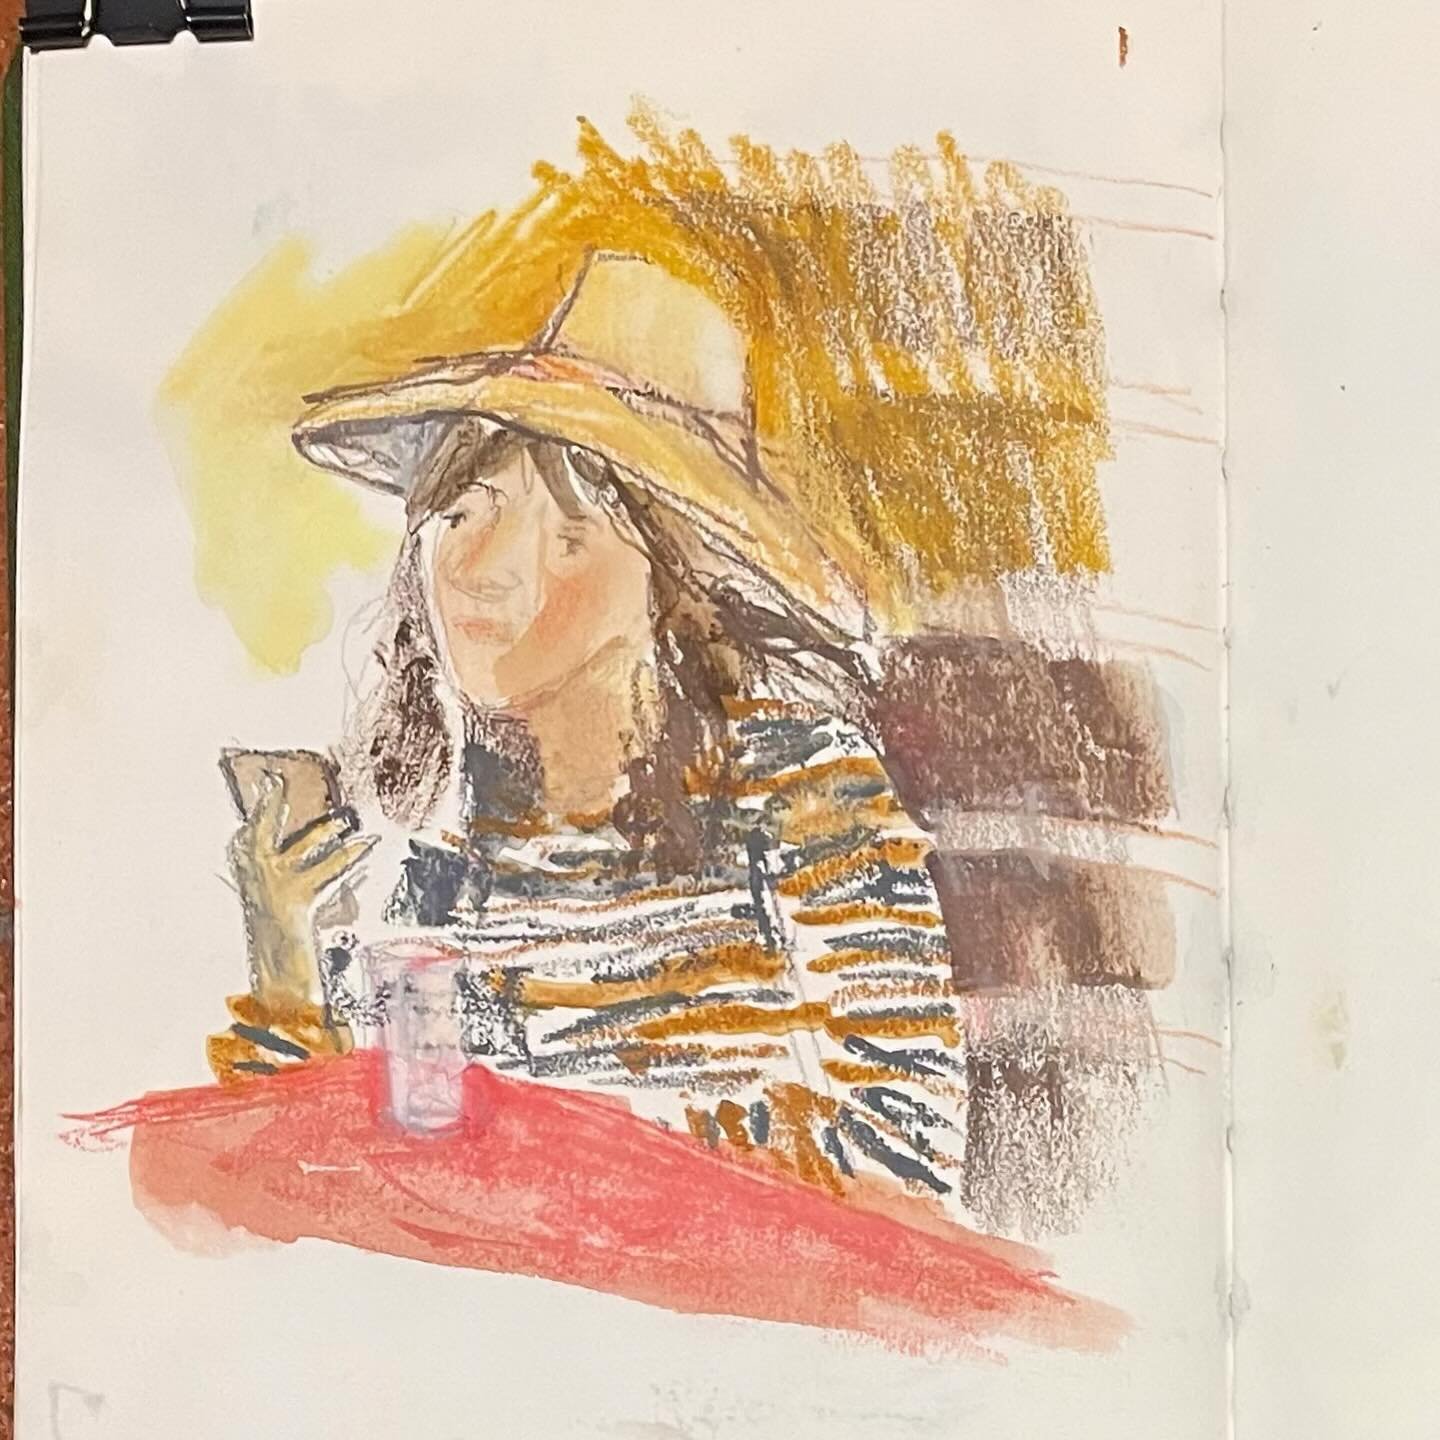 Today&rsquo;s post: people peeking. More cafe life and out and about. 
#sketchbook #peoplewatching #characters #traveljournal #florence #torre #towers #italy #italianlandscape #florencesketchbook #iloveitaly #sketchbooking #sketchbookart #drawingital